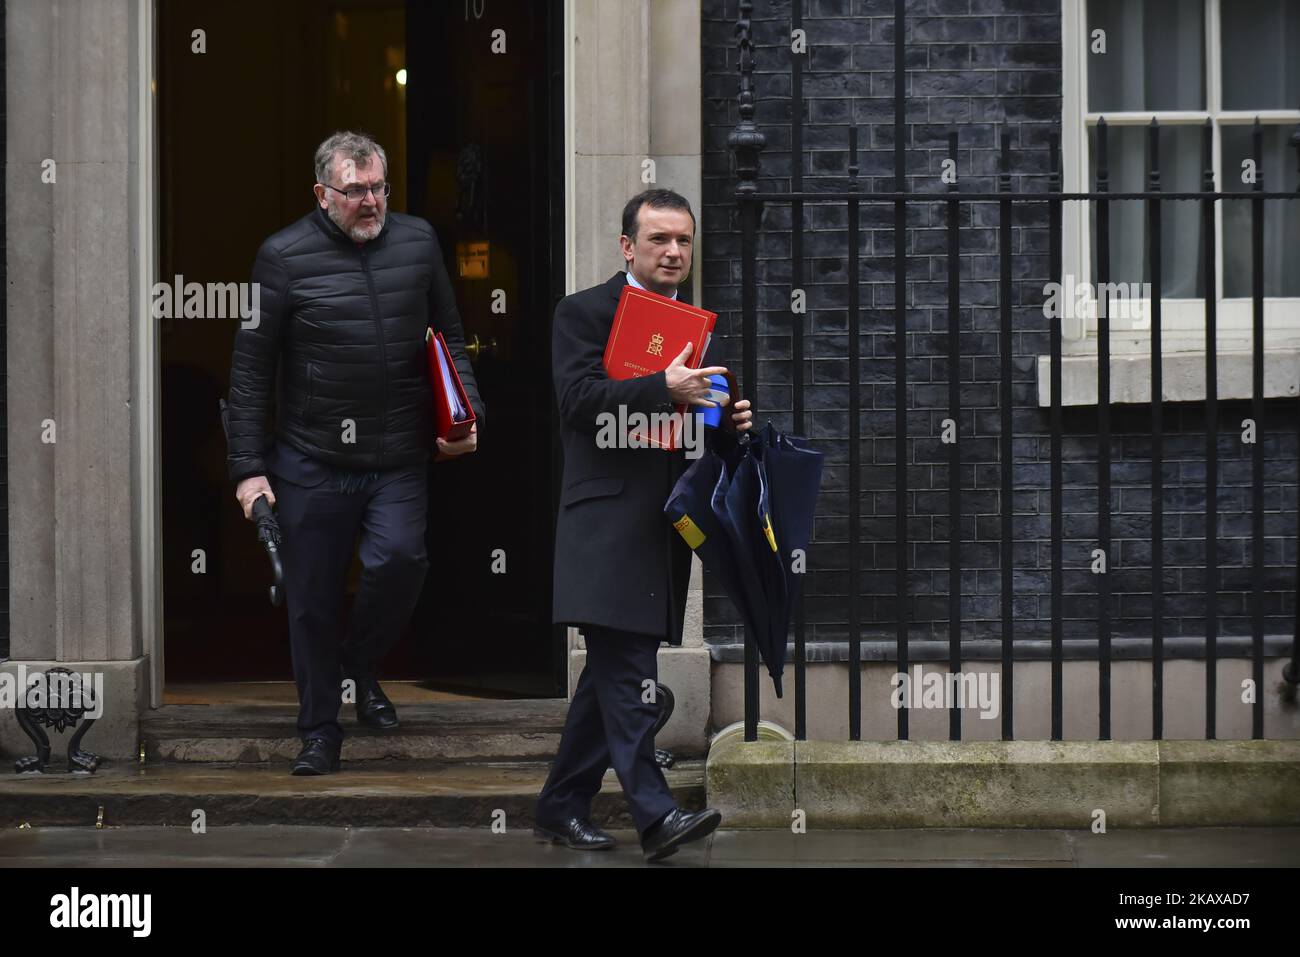 Britain's Secretary of State for Wales Alun Cairns (R) and Secretary of State for Scotland David Mundell leave 10 Downing Street after attending the weekly Cabinet Meeting, London on March 27, 2018. Prime Minister Theresa May is facing another Brexit hurdle after the opposition Labour Party announced its pushing for a legal commitment to avoid a hard border with Ireland after Britain leaves the European Union. The Migration Advisory Committee (MAC) said businesses are concerned about their ability to recruit workers from the EU after Britain leaves the EU. UK employers also see EU workers as ' Stock Photo